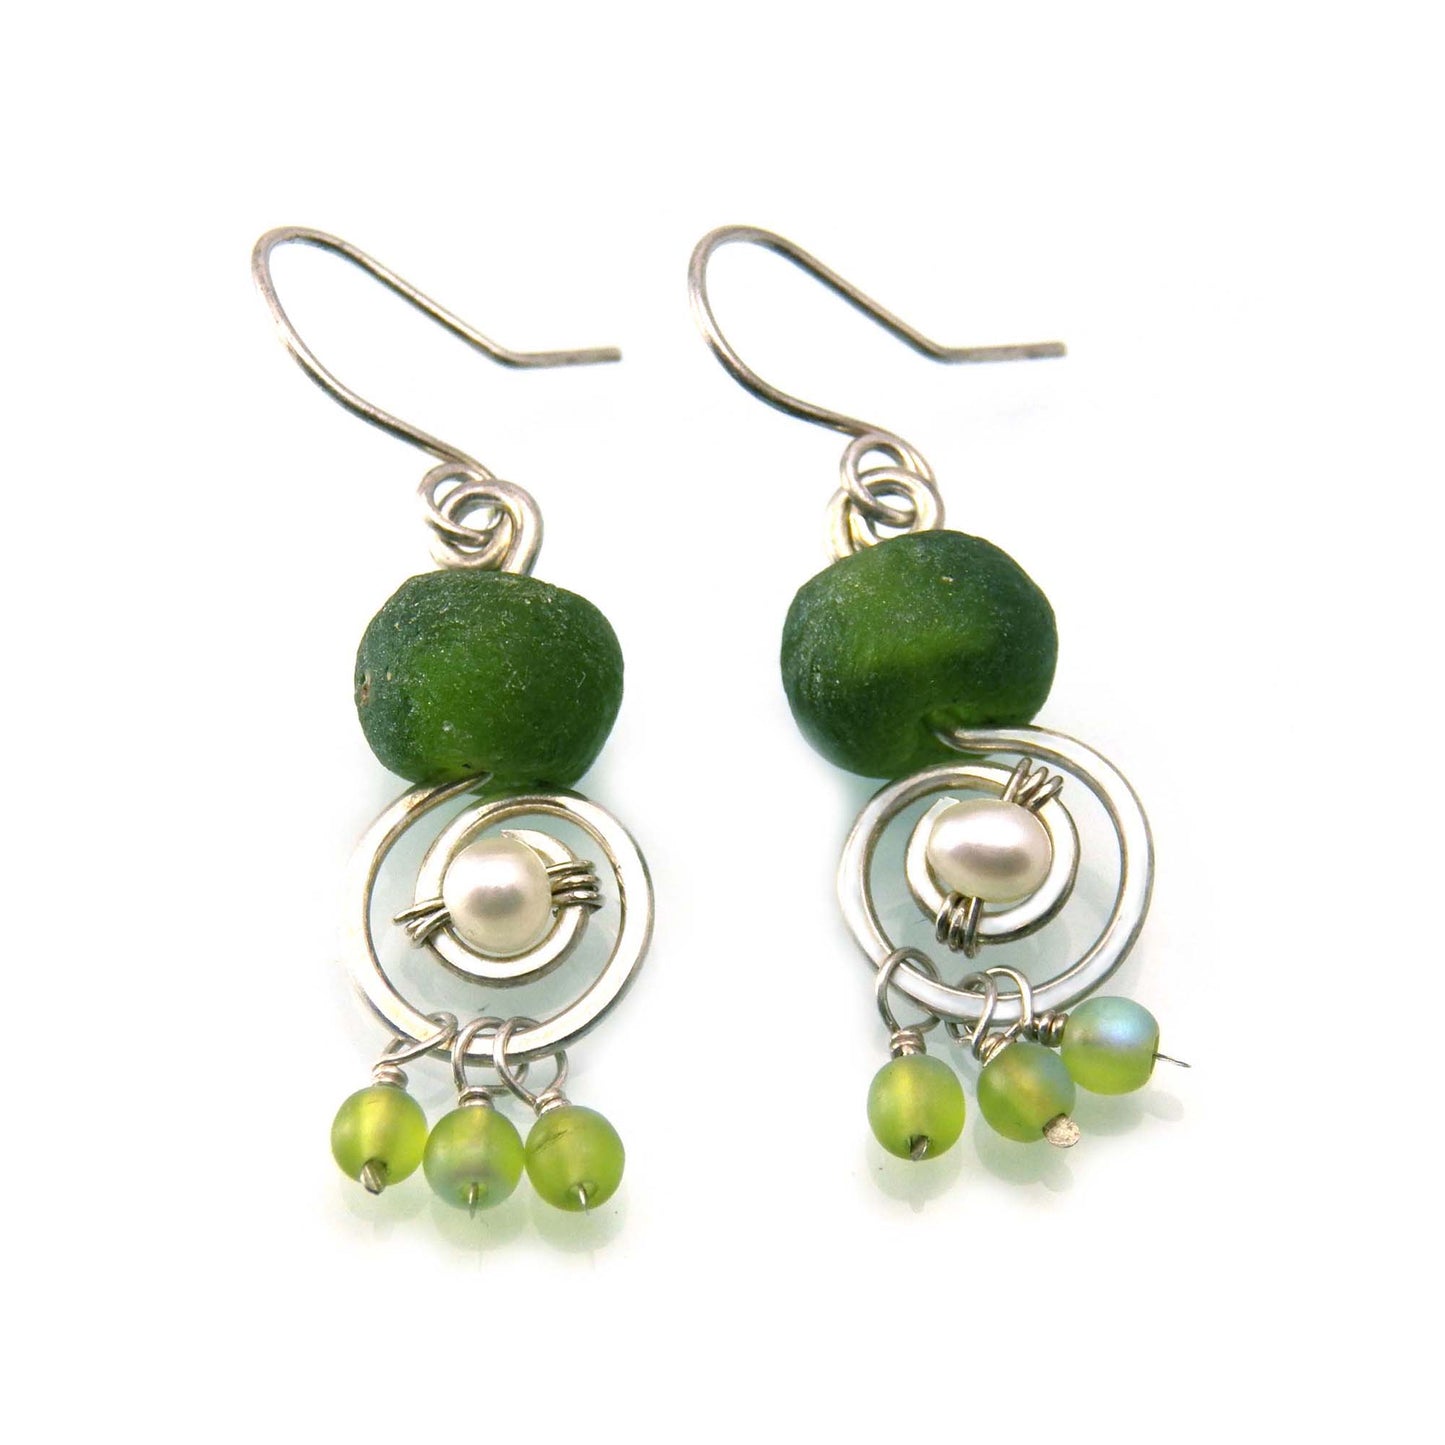 Sterling silver and Ancient Roman Glass Earrings with Pearls